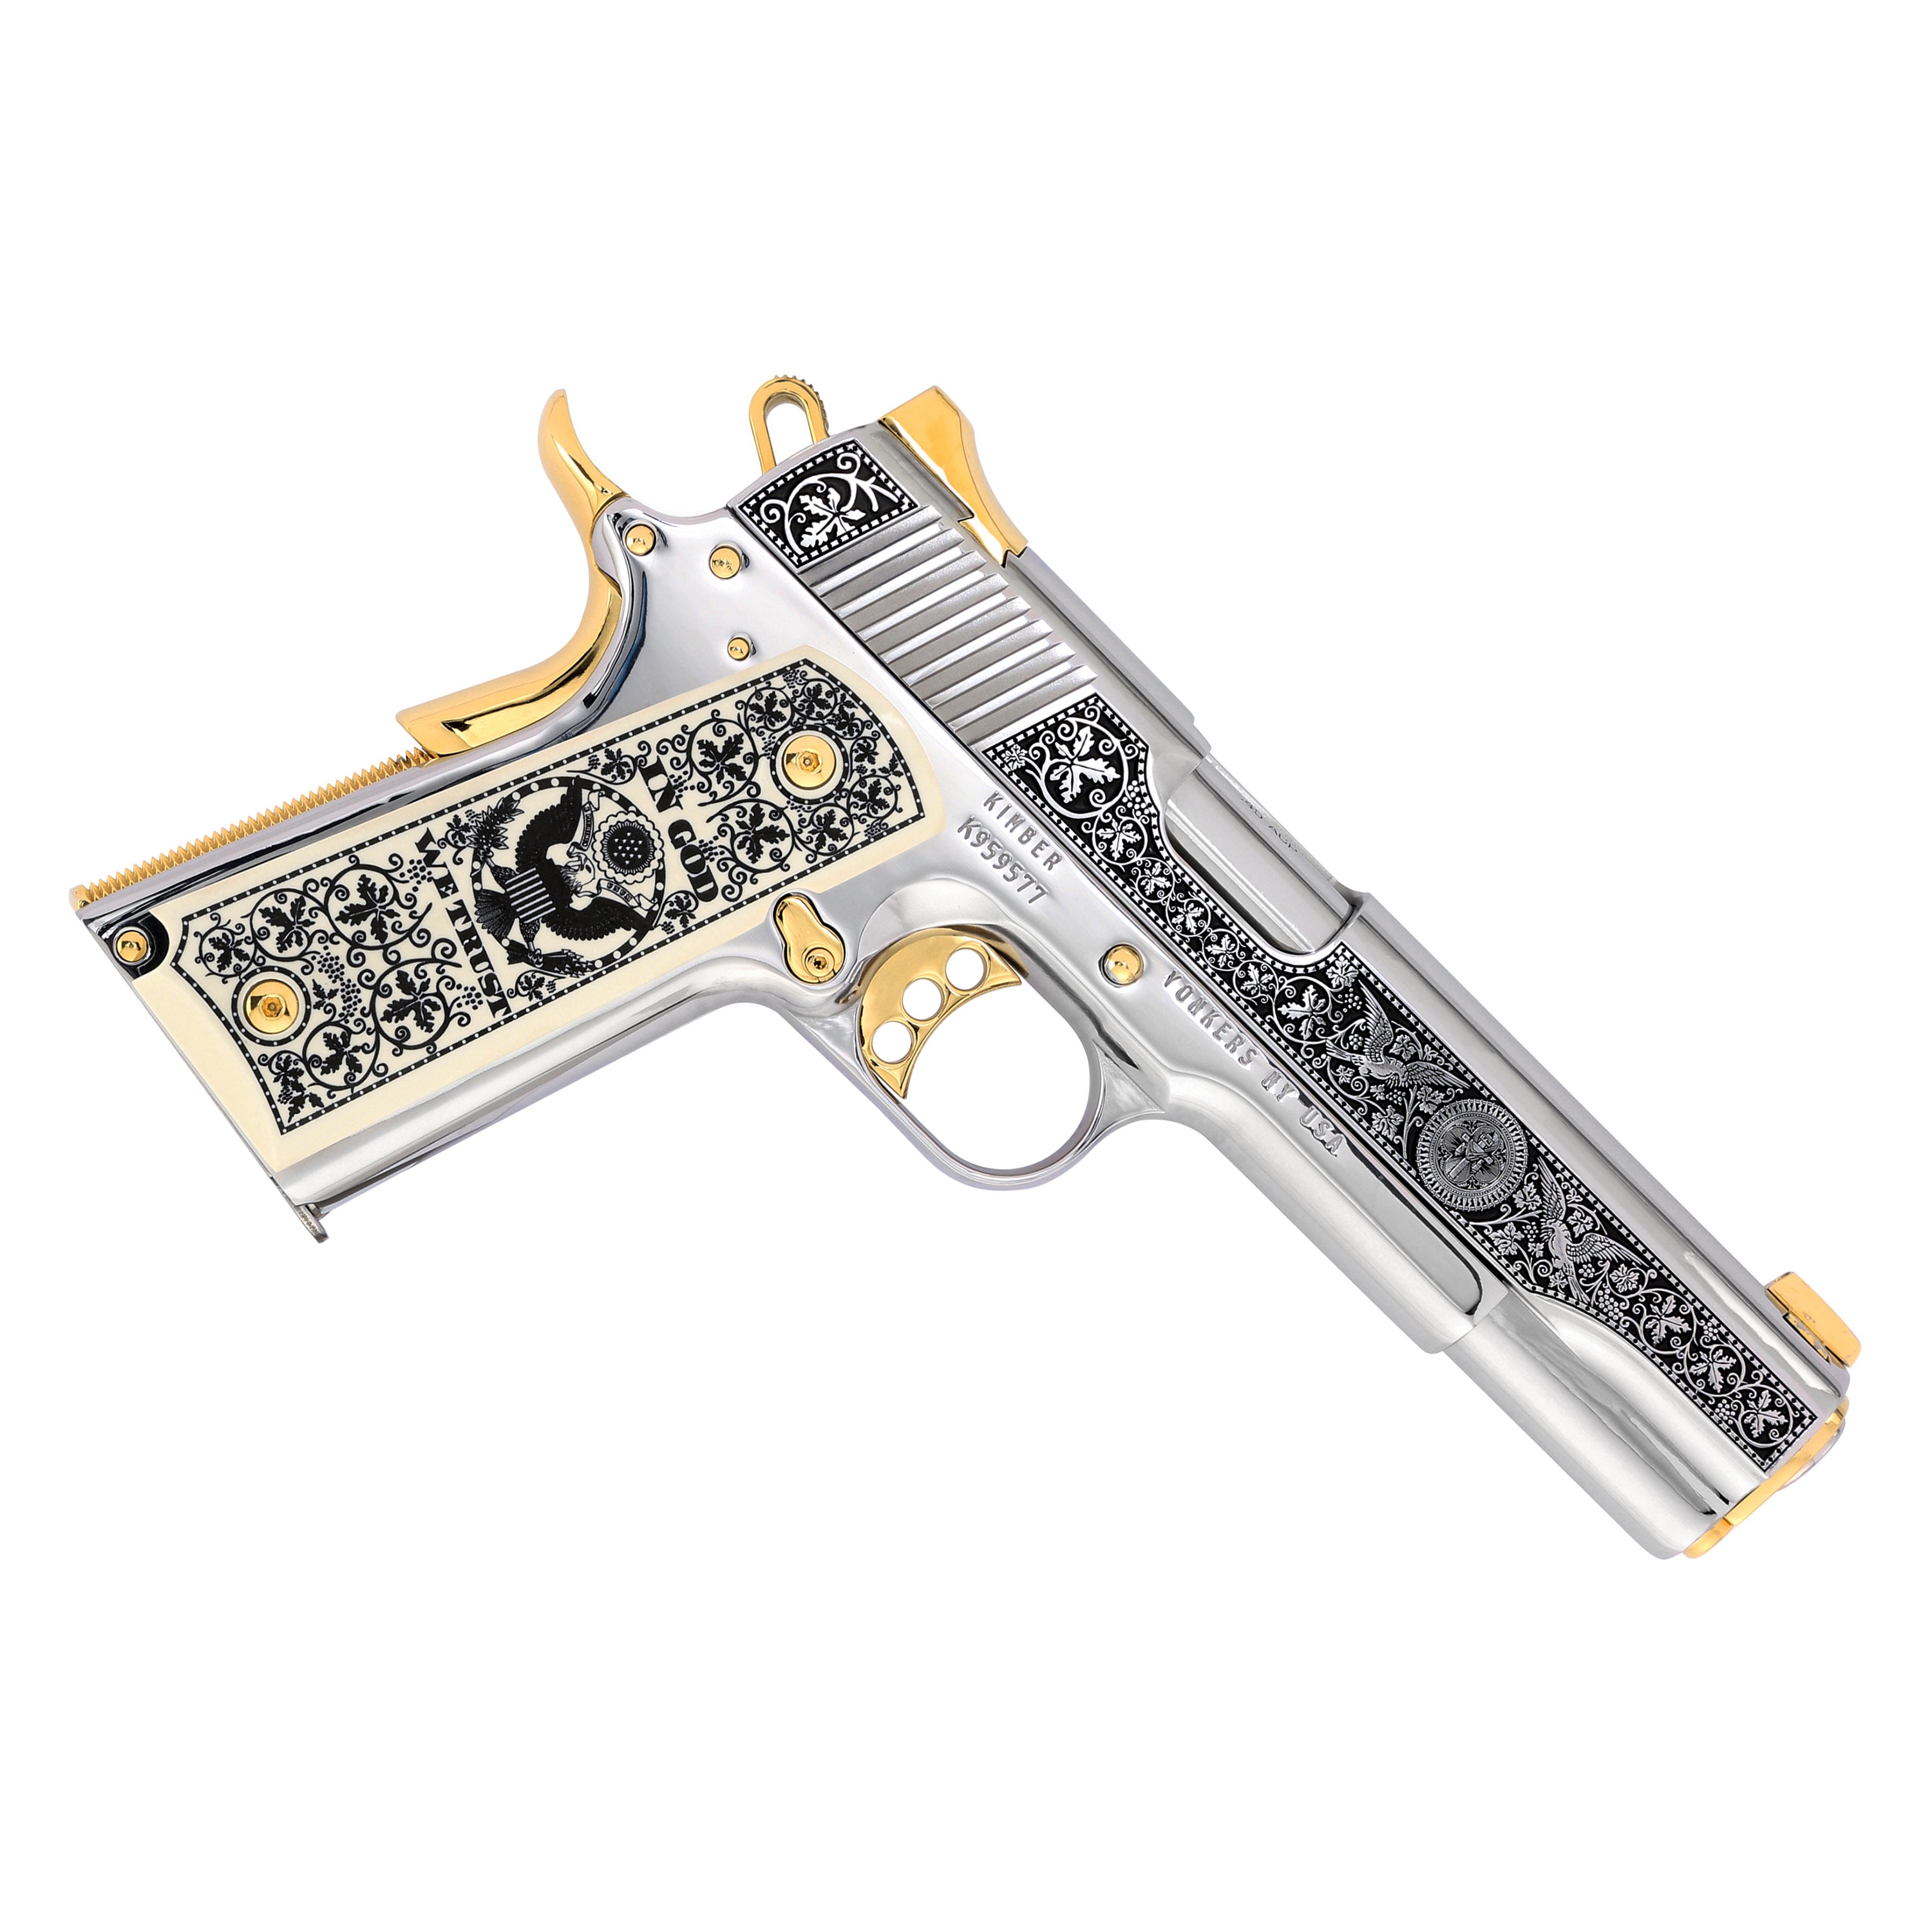 Kimber 1911 Stainless II, 45 ACP, Celestial Vines, High Polished Stainless Steel with 24 Karat Gold Accents